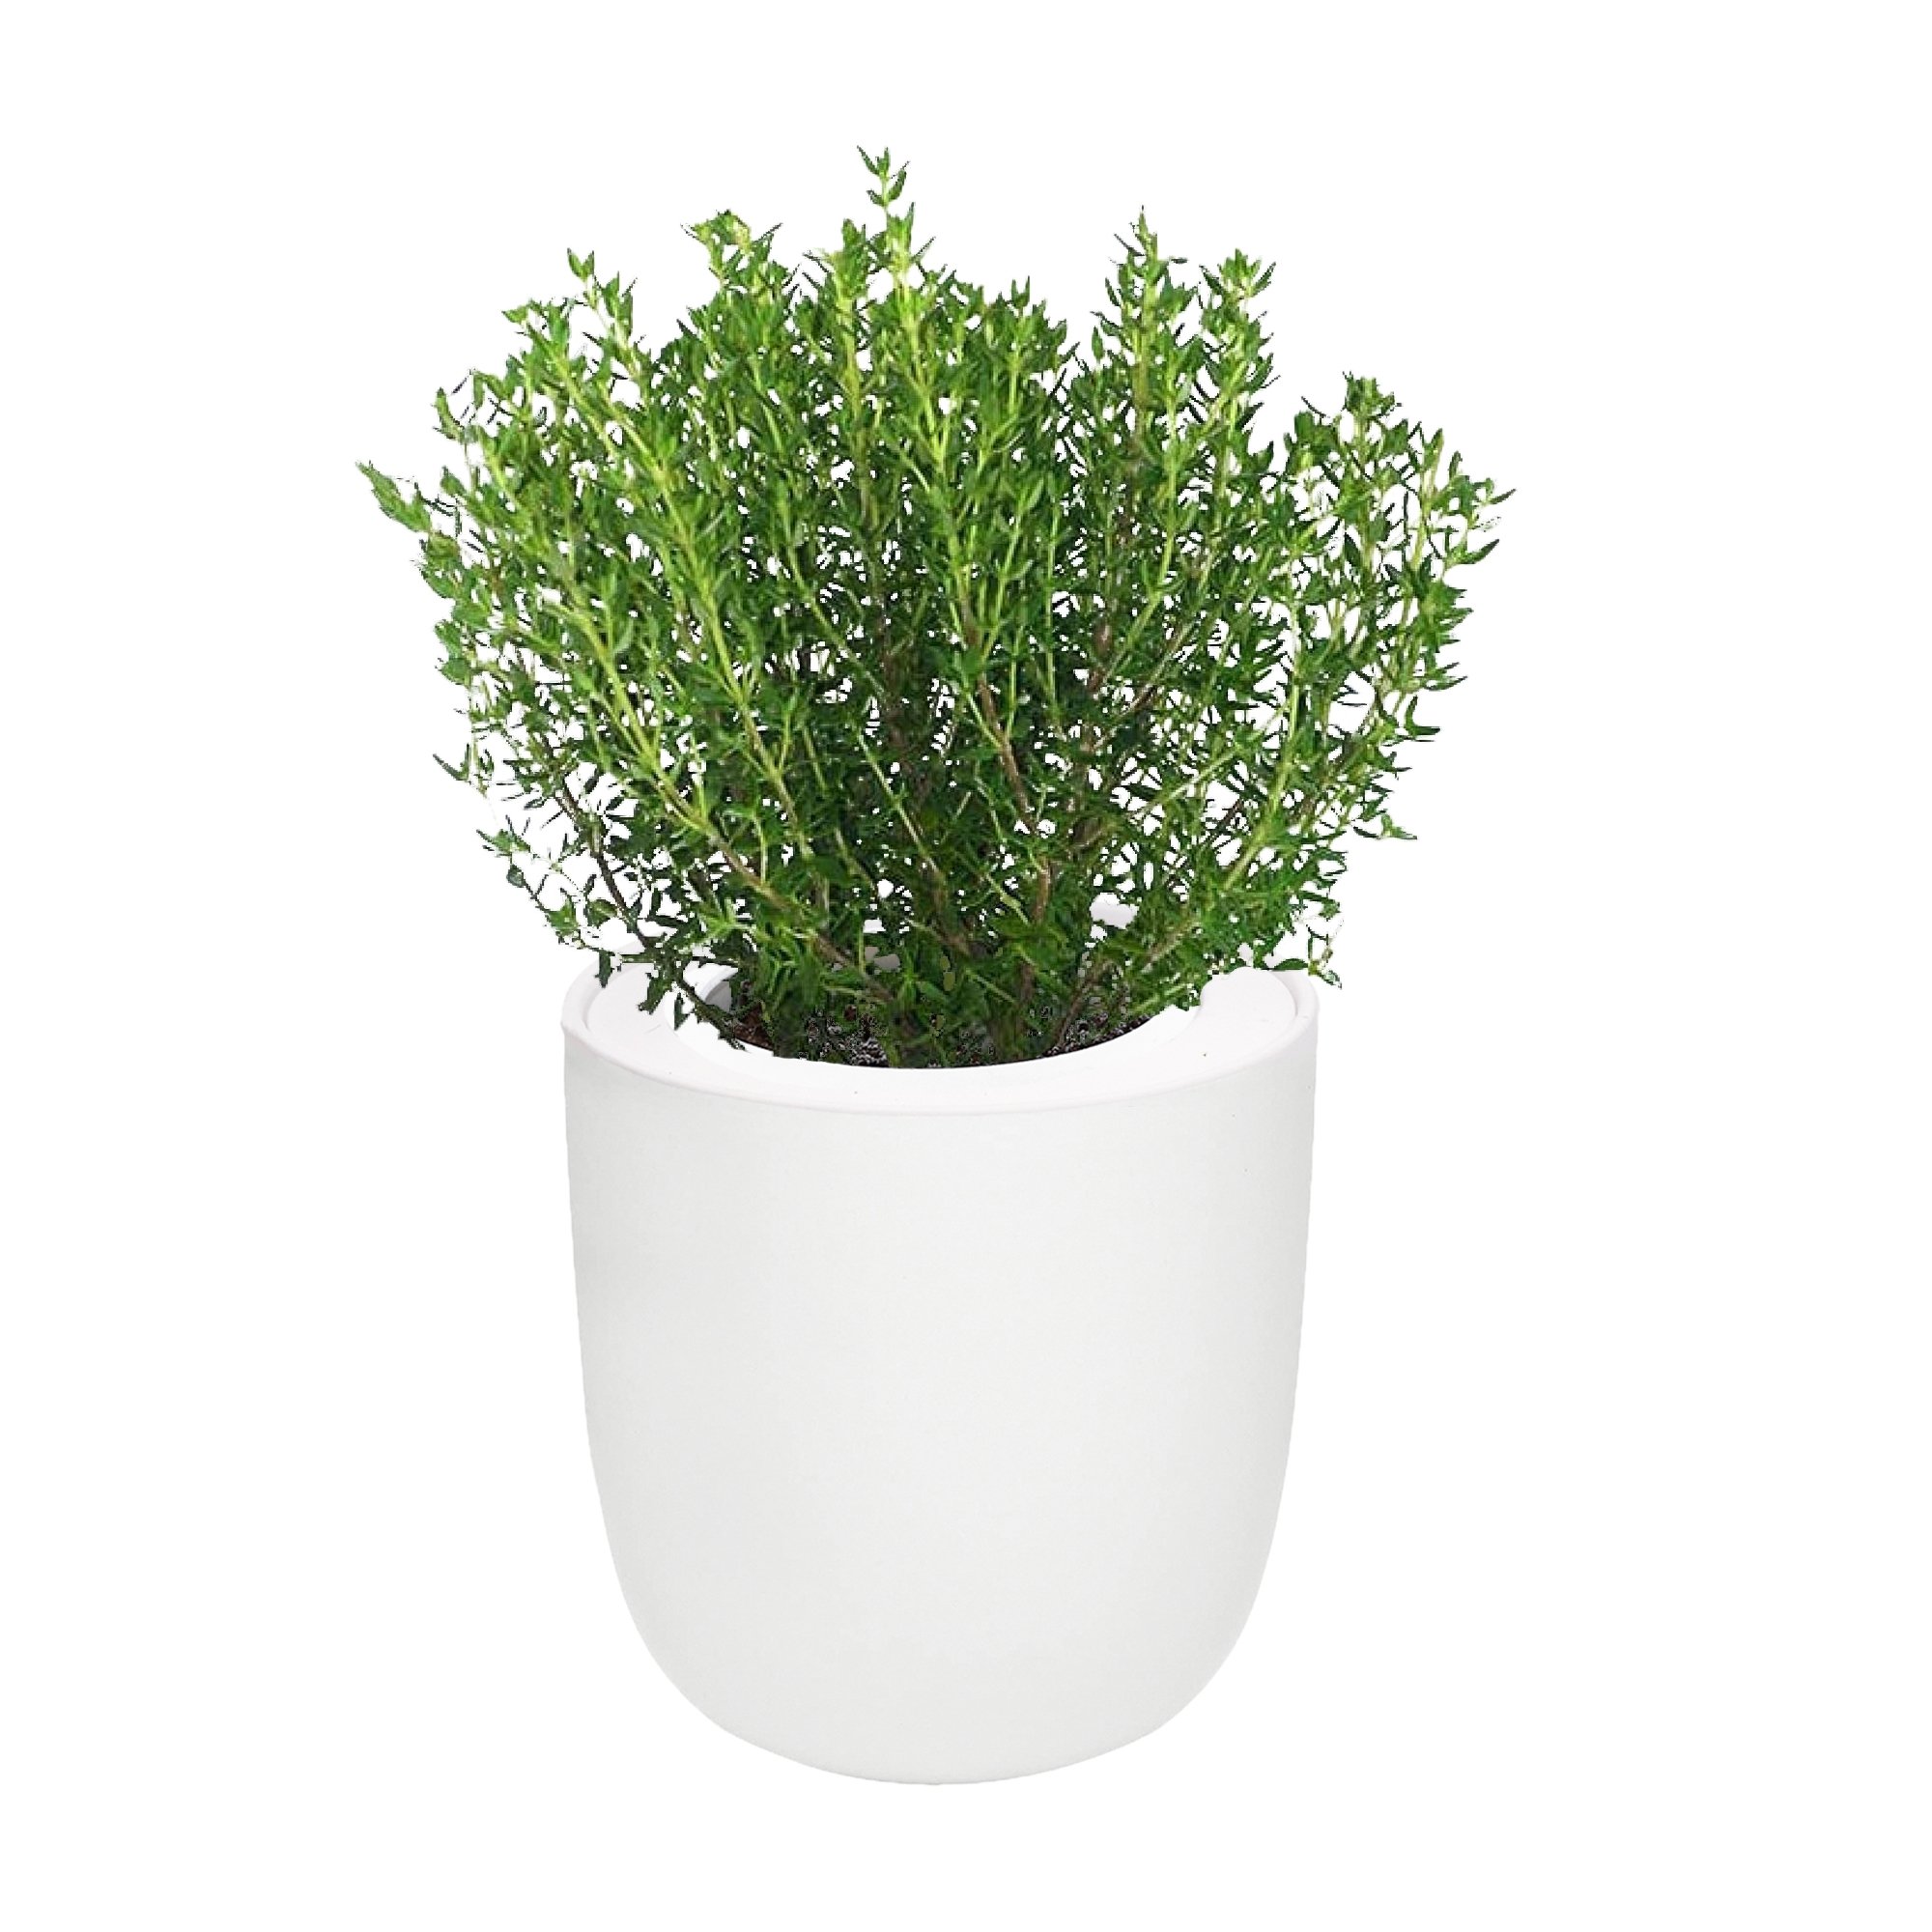 Thyme White Ceramic Pot Hydroponic Growing Kit with Seeds